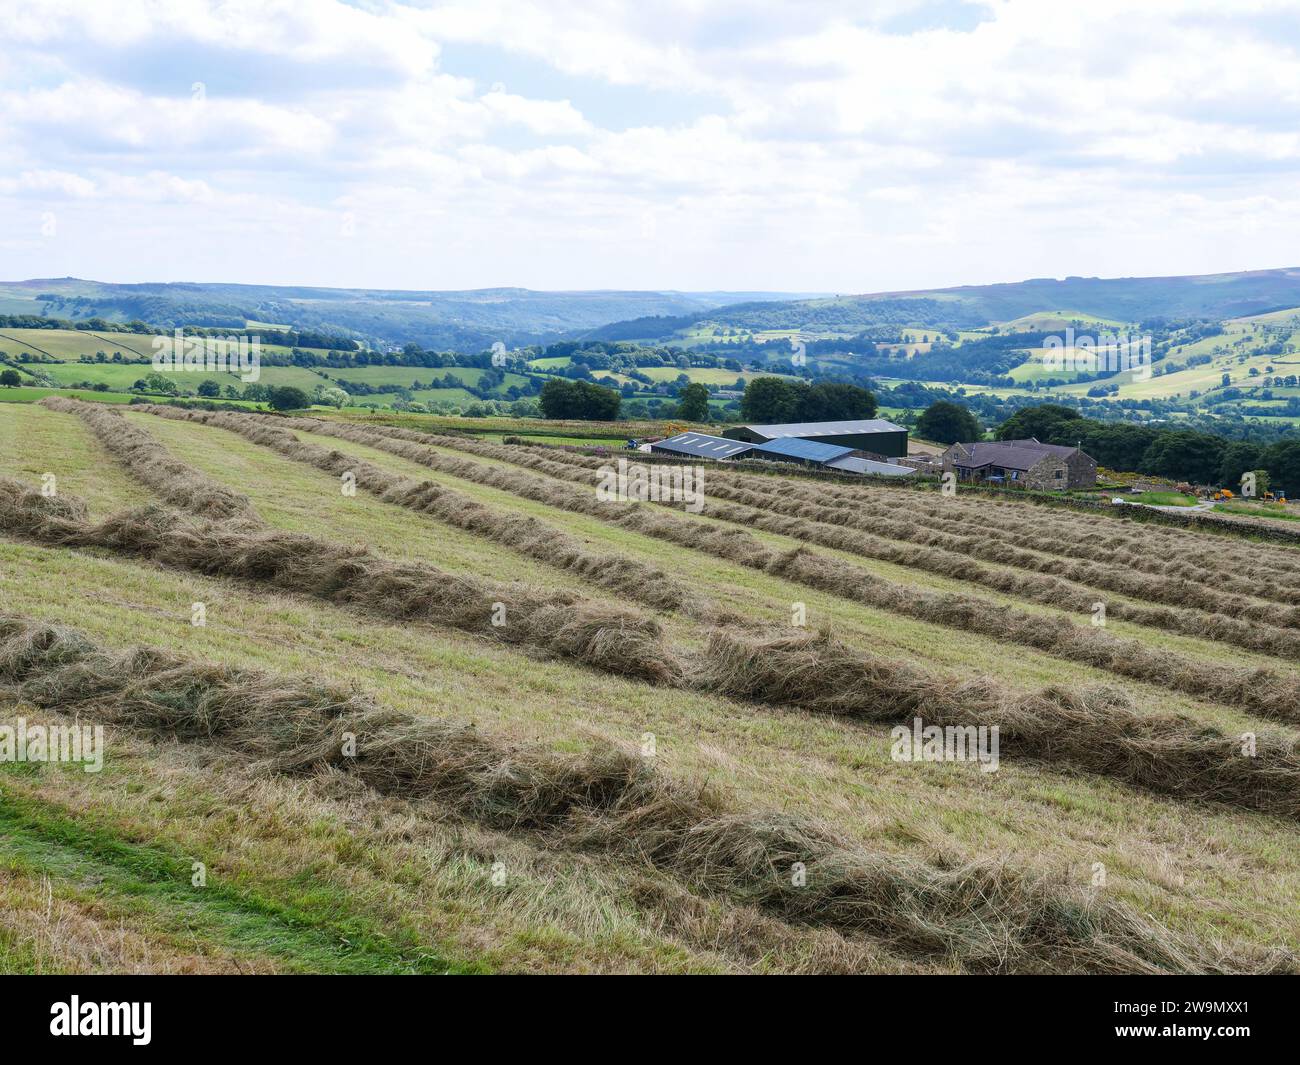 Swaths of dry hay in farmland in a hilly English countryside of Derbyshire in Peak District National Park, United Kingdom. Stock Photo